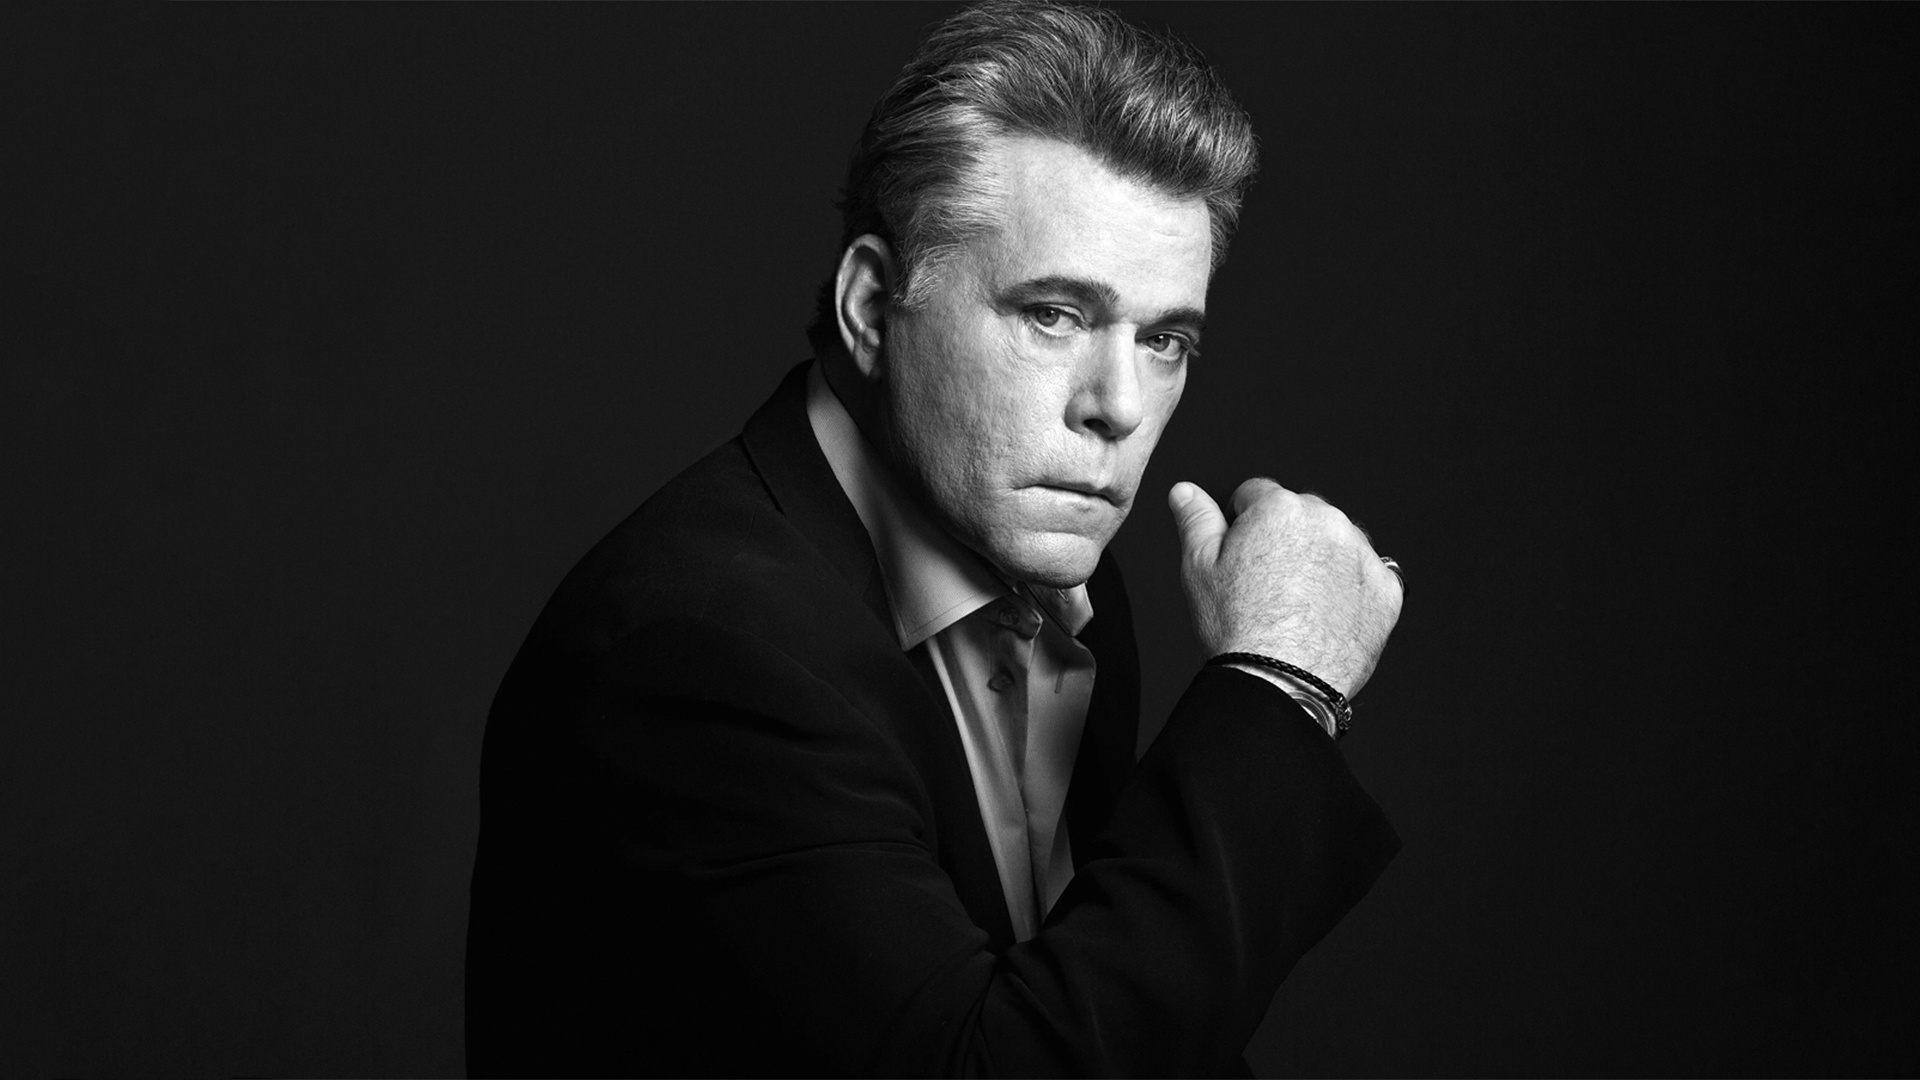 Ray Liotta: Played a preacher in the faith-based film The Identical in 2014. 1920x1080 Full HD Wallpaper.